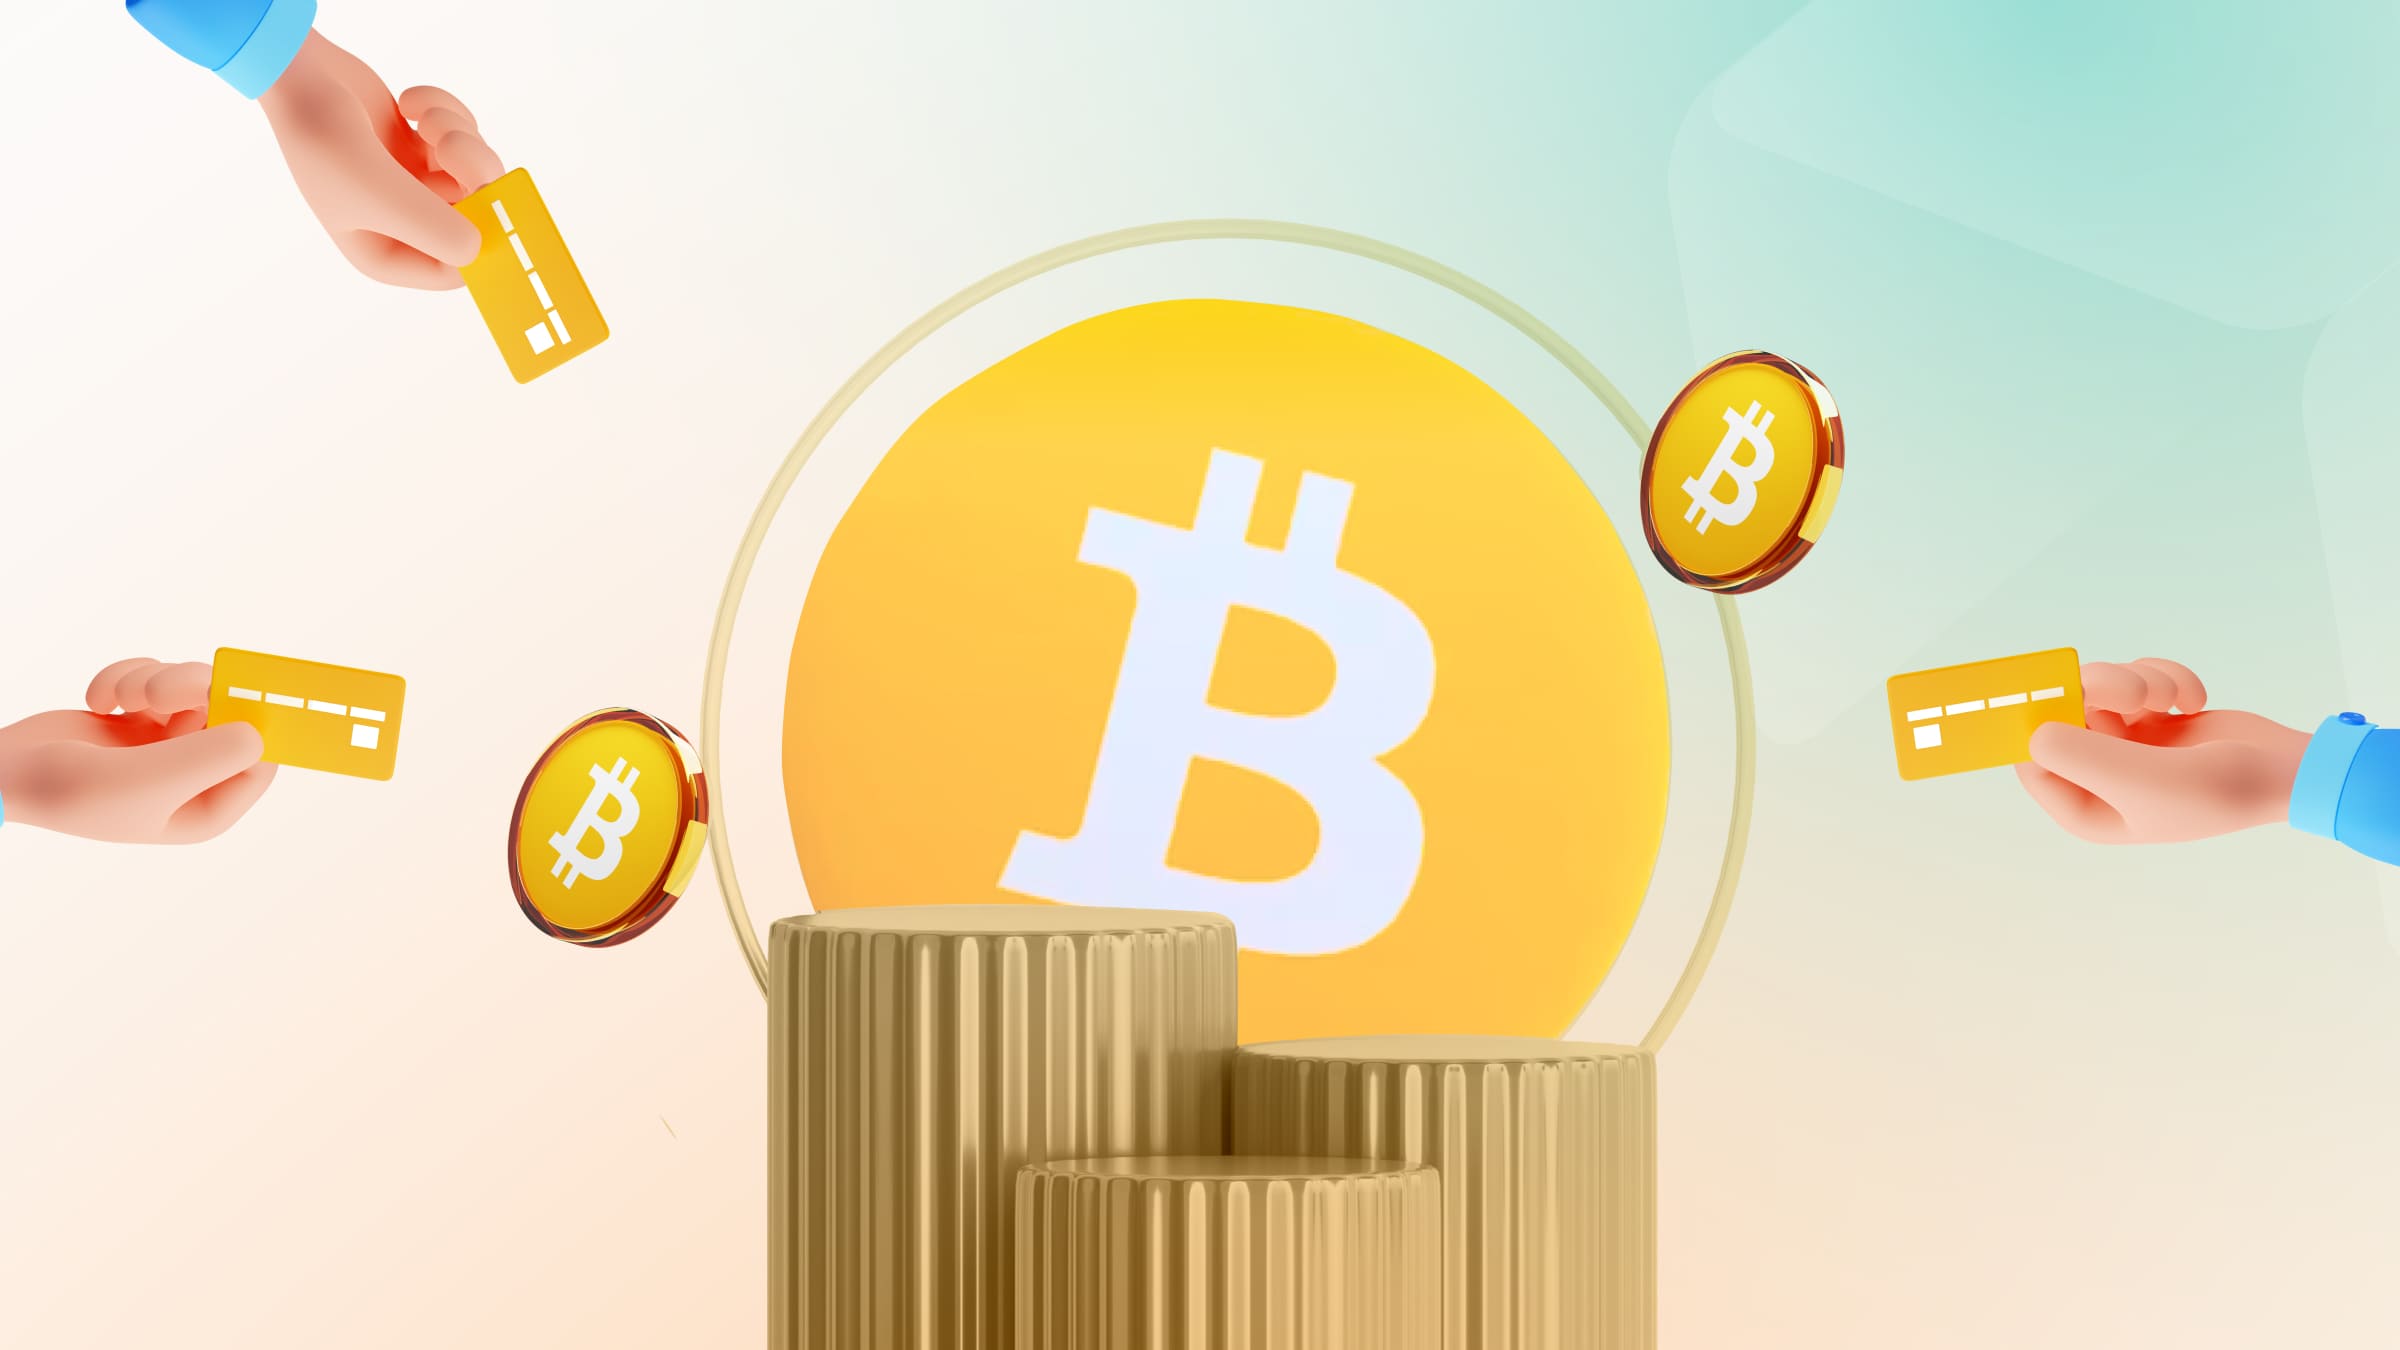 The advantages of cryptocurrency payments include high security and low fees.